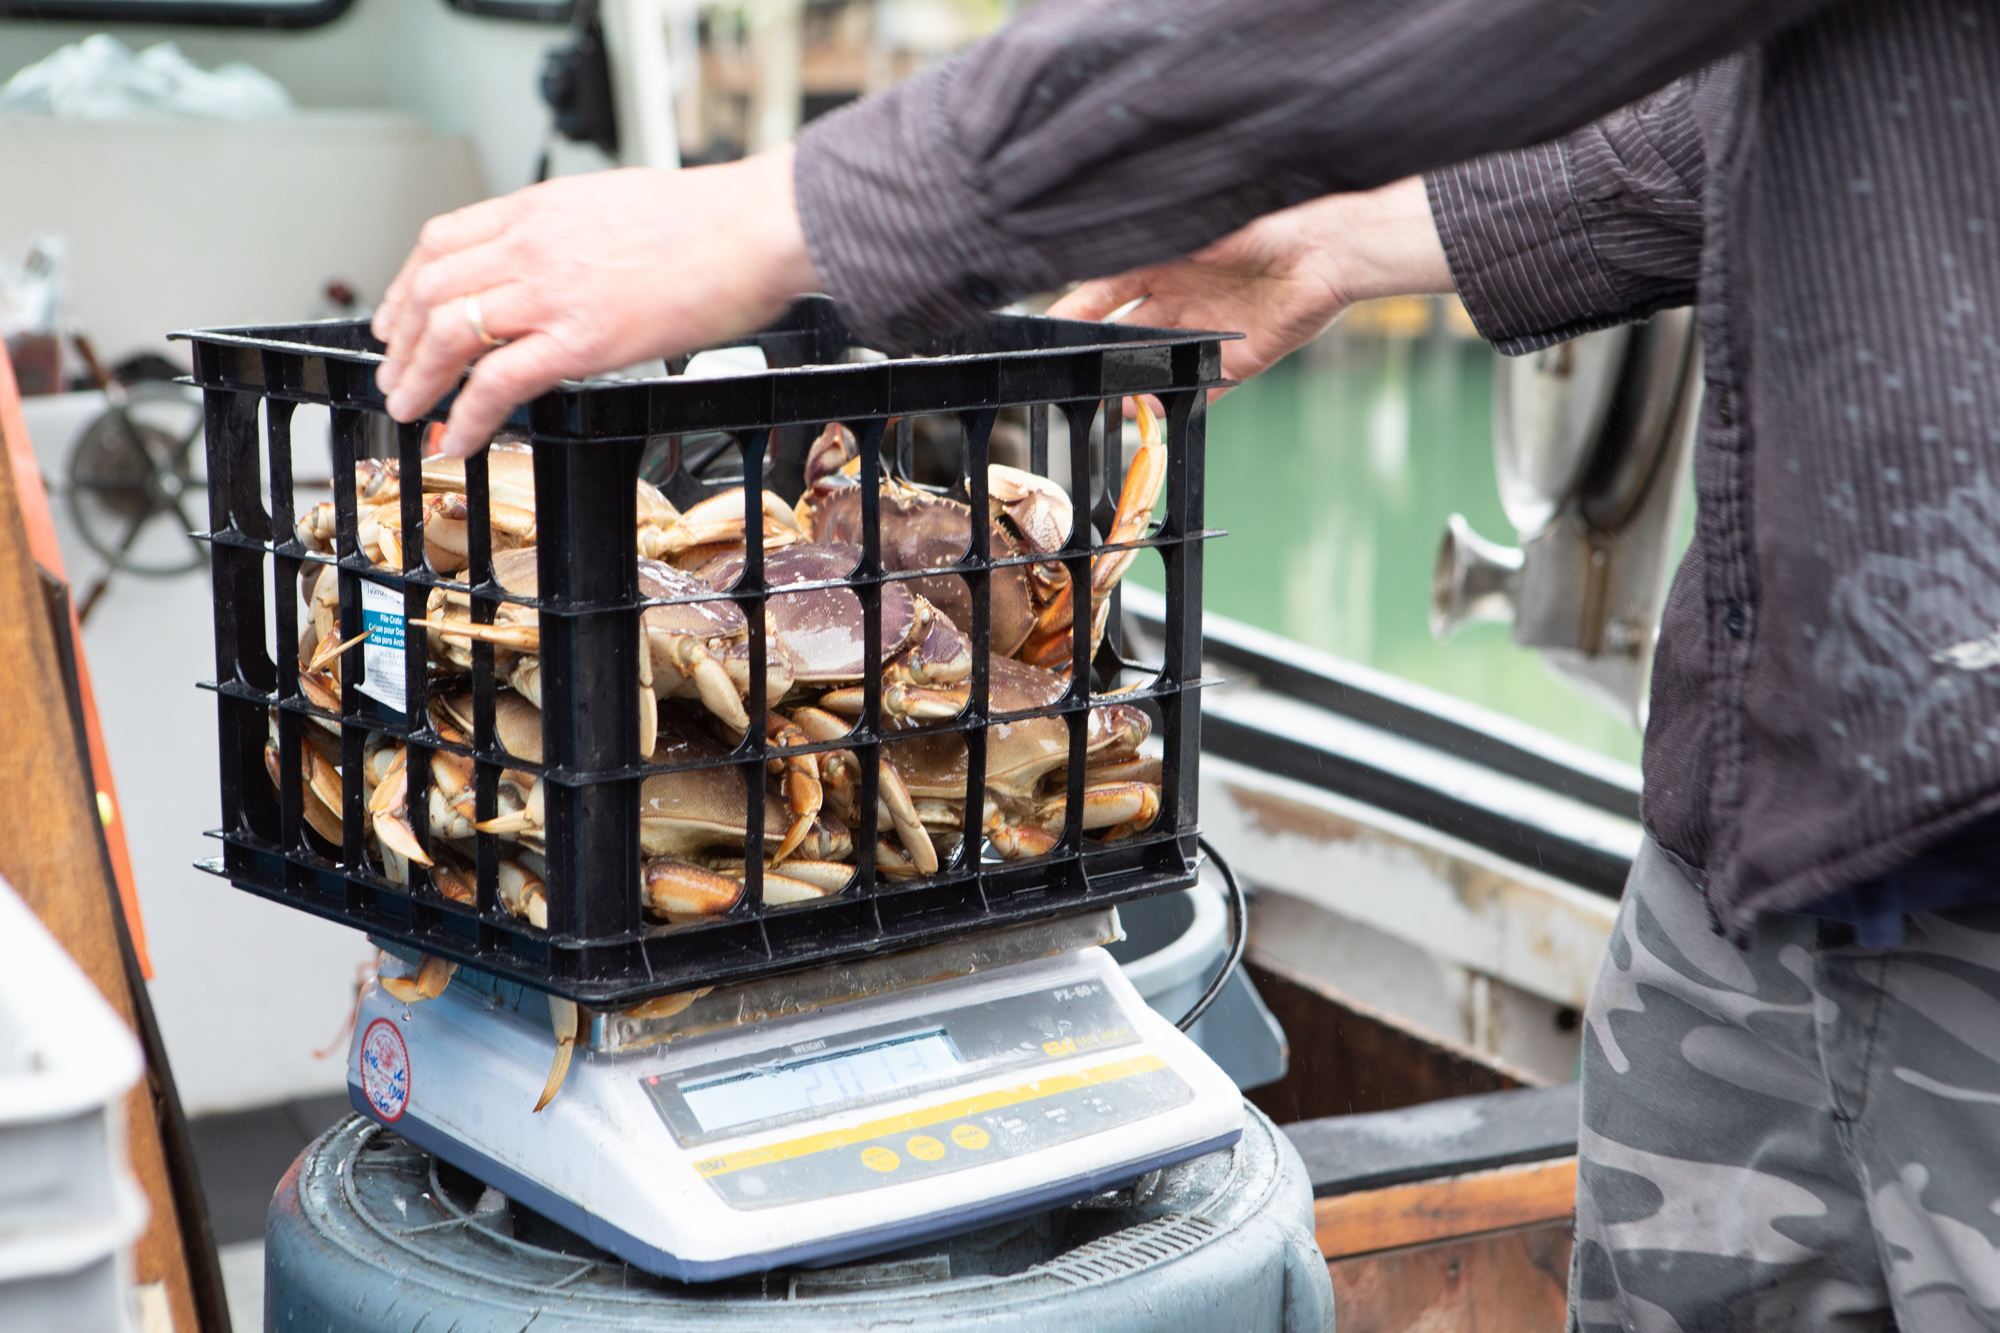 Live Dungeness crab getting weighed